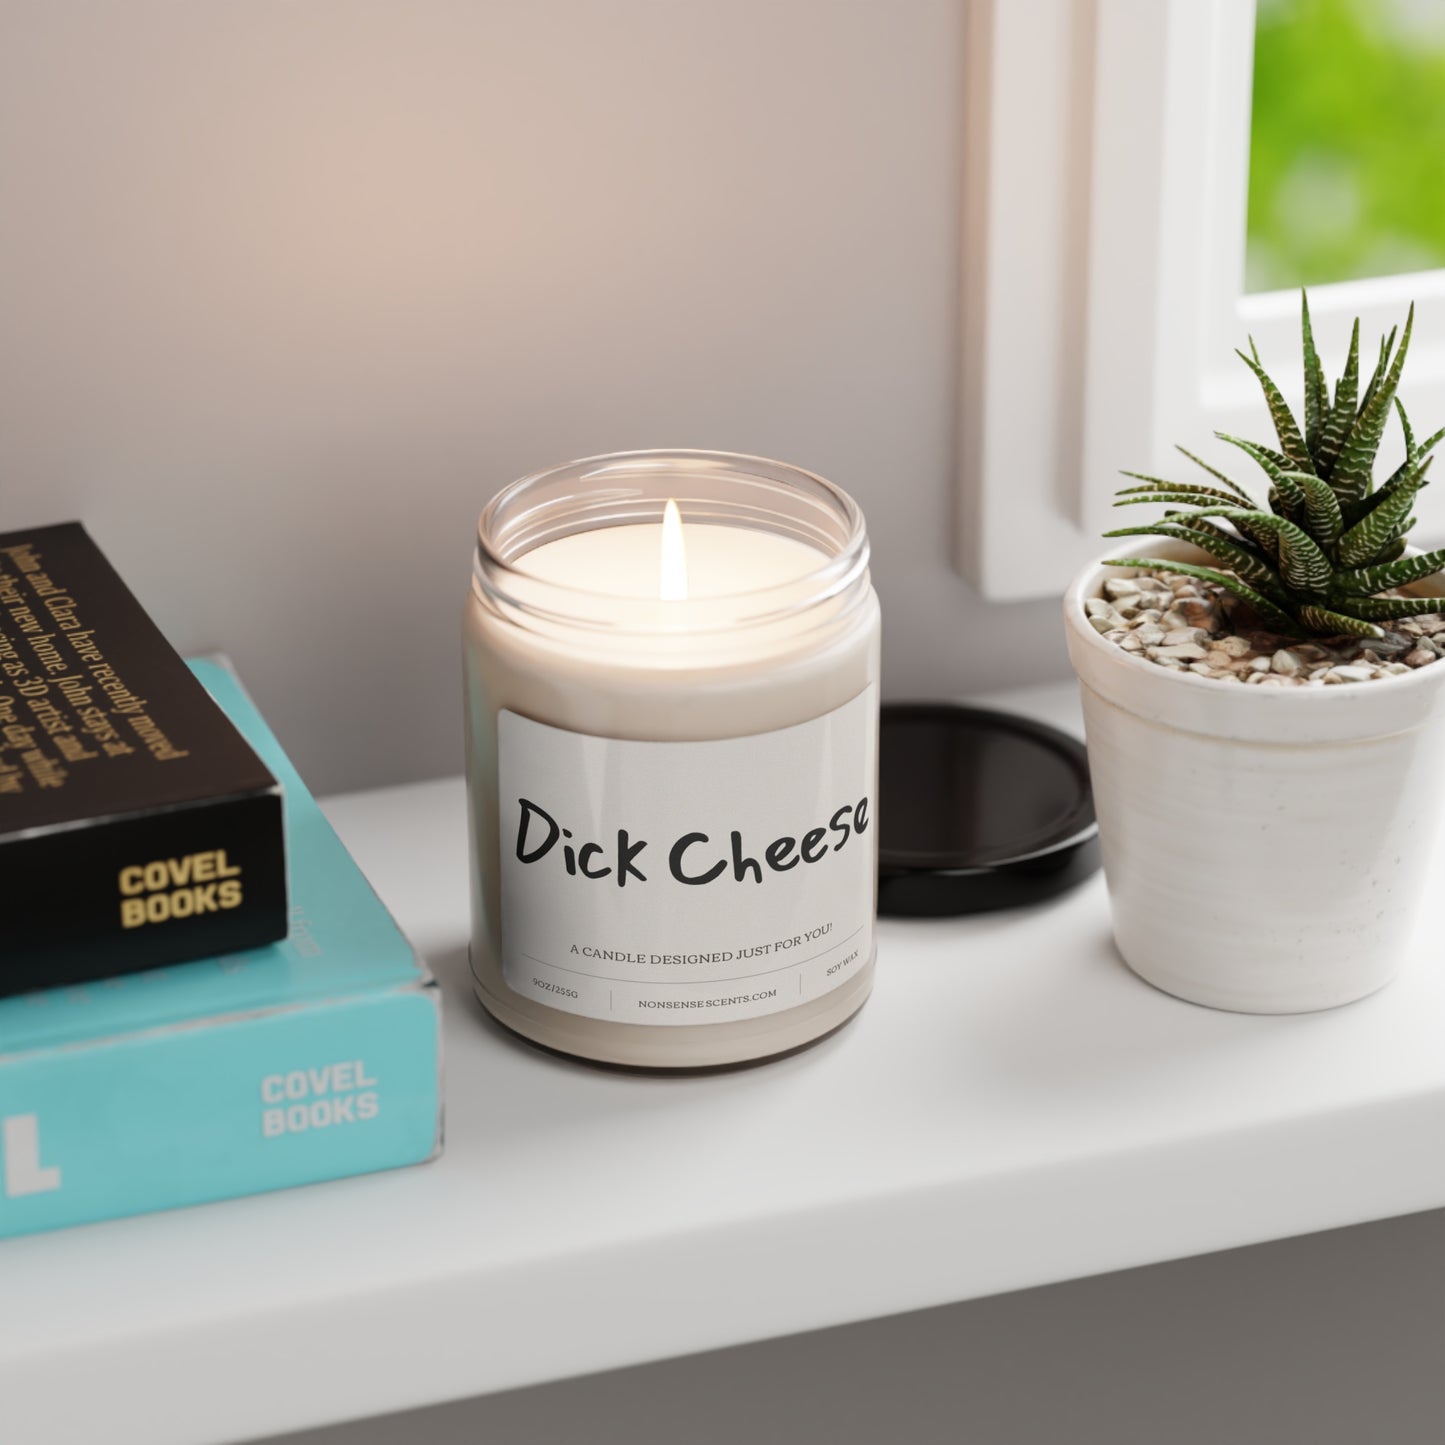 "Dick Cheese" Scented Candle